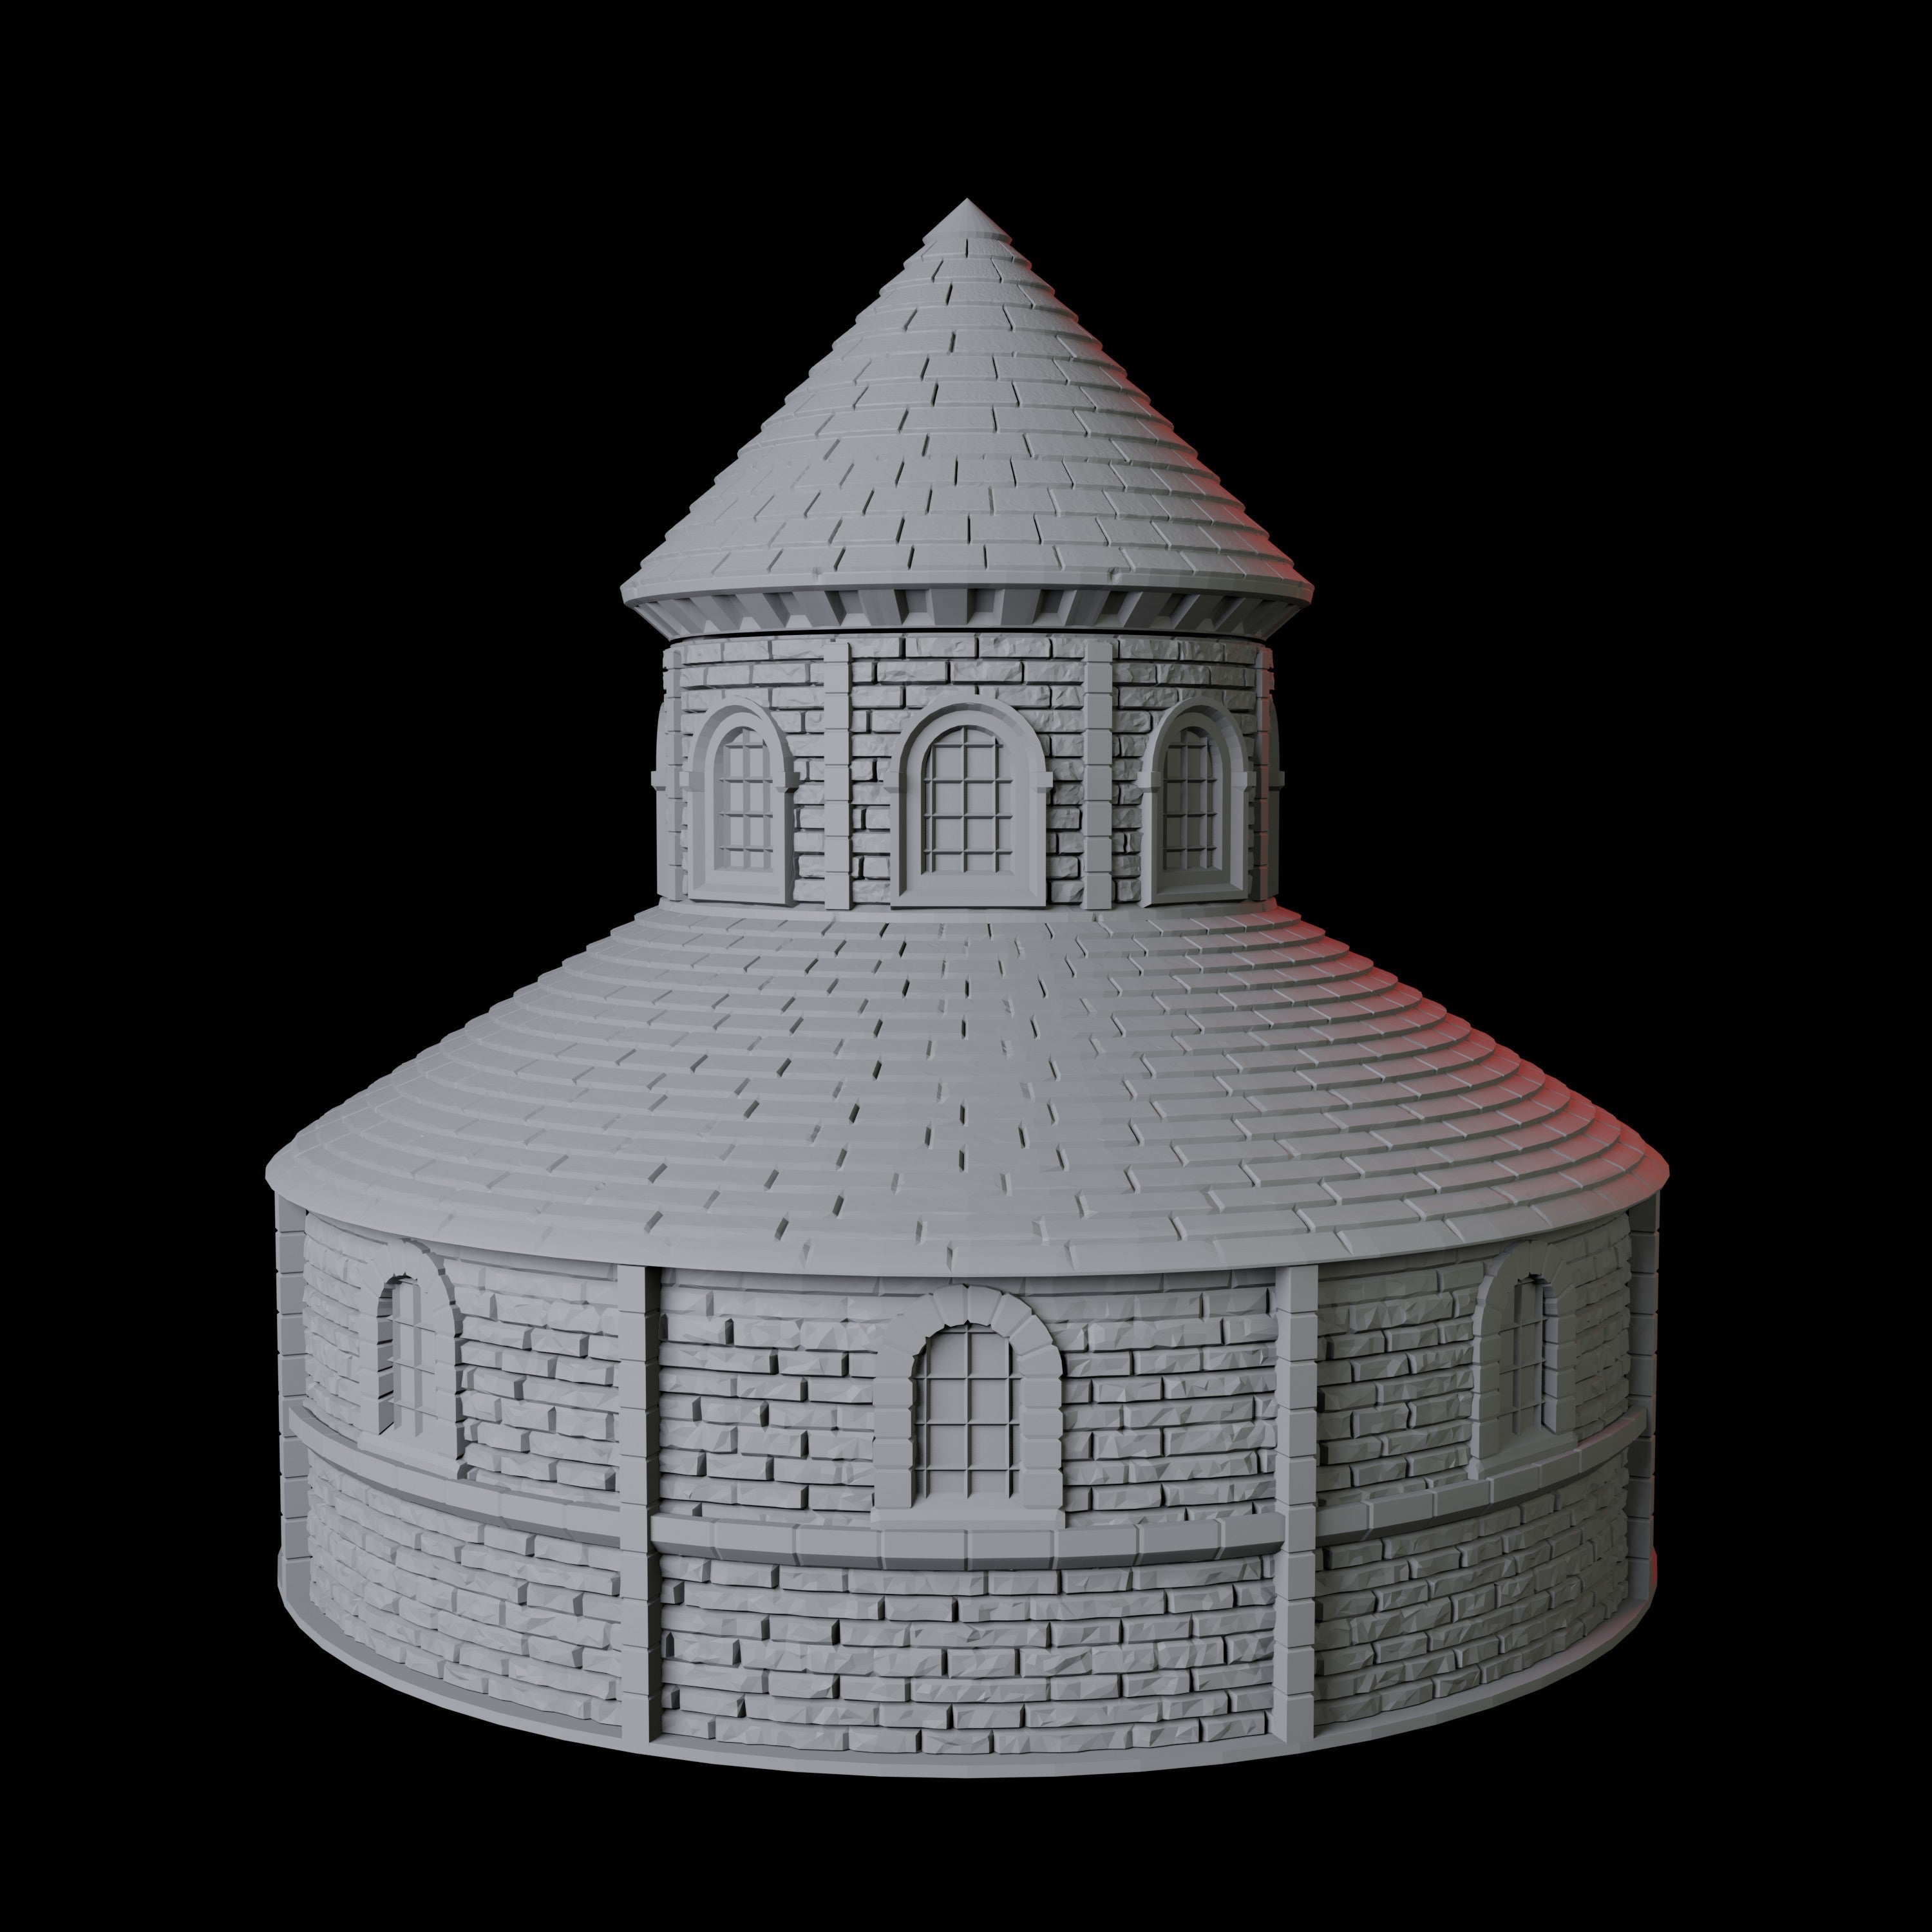 Round Church Dice Tower Miniature for Dungeons and Dragons